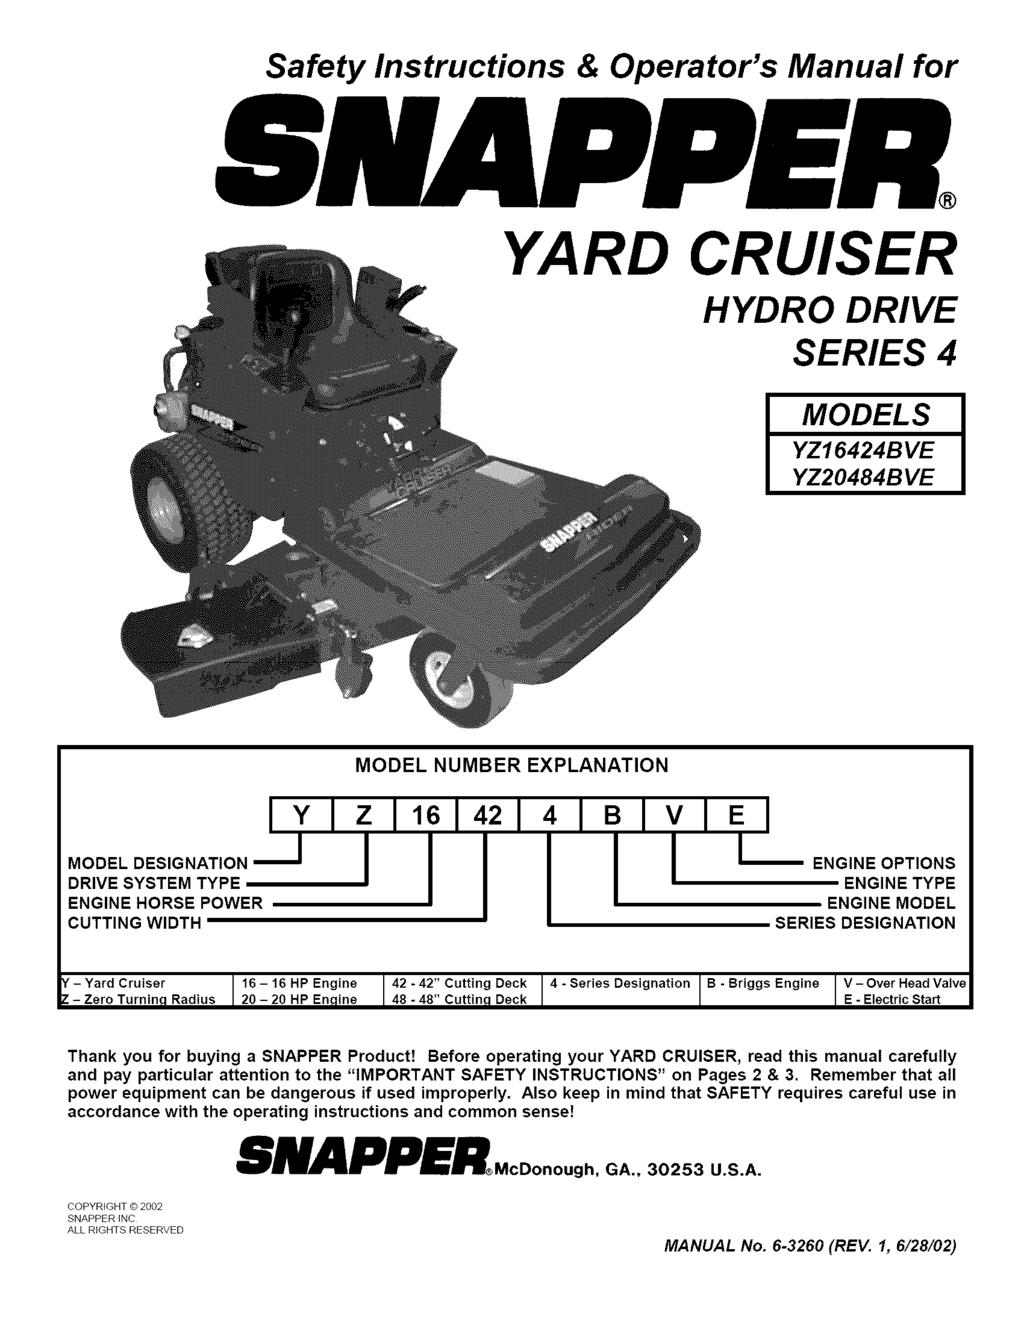 Safety Instructions & Operator's Manual for YARD CRUISER HYDRO DRIVE SERIES 4 MODELS YZ16424BVE YZ20484BVE MODEL NUMBER EXPLANATION I YI z 1161, 21,.